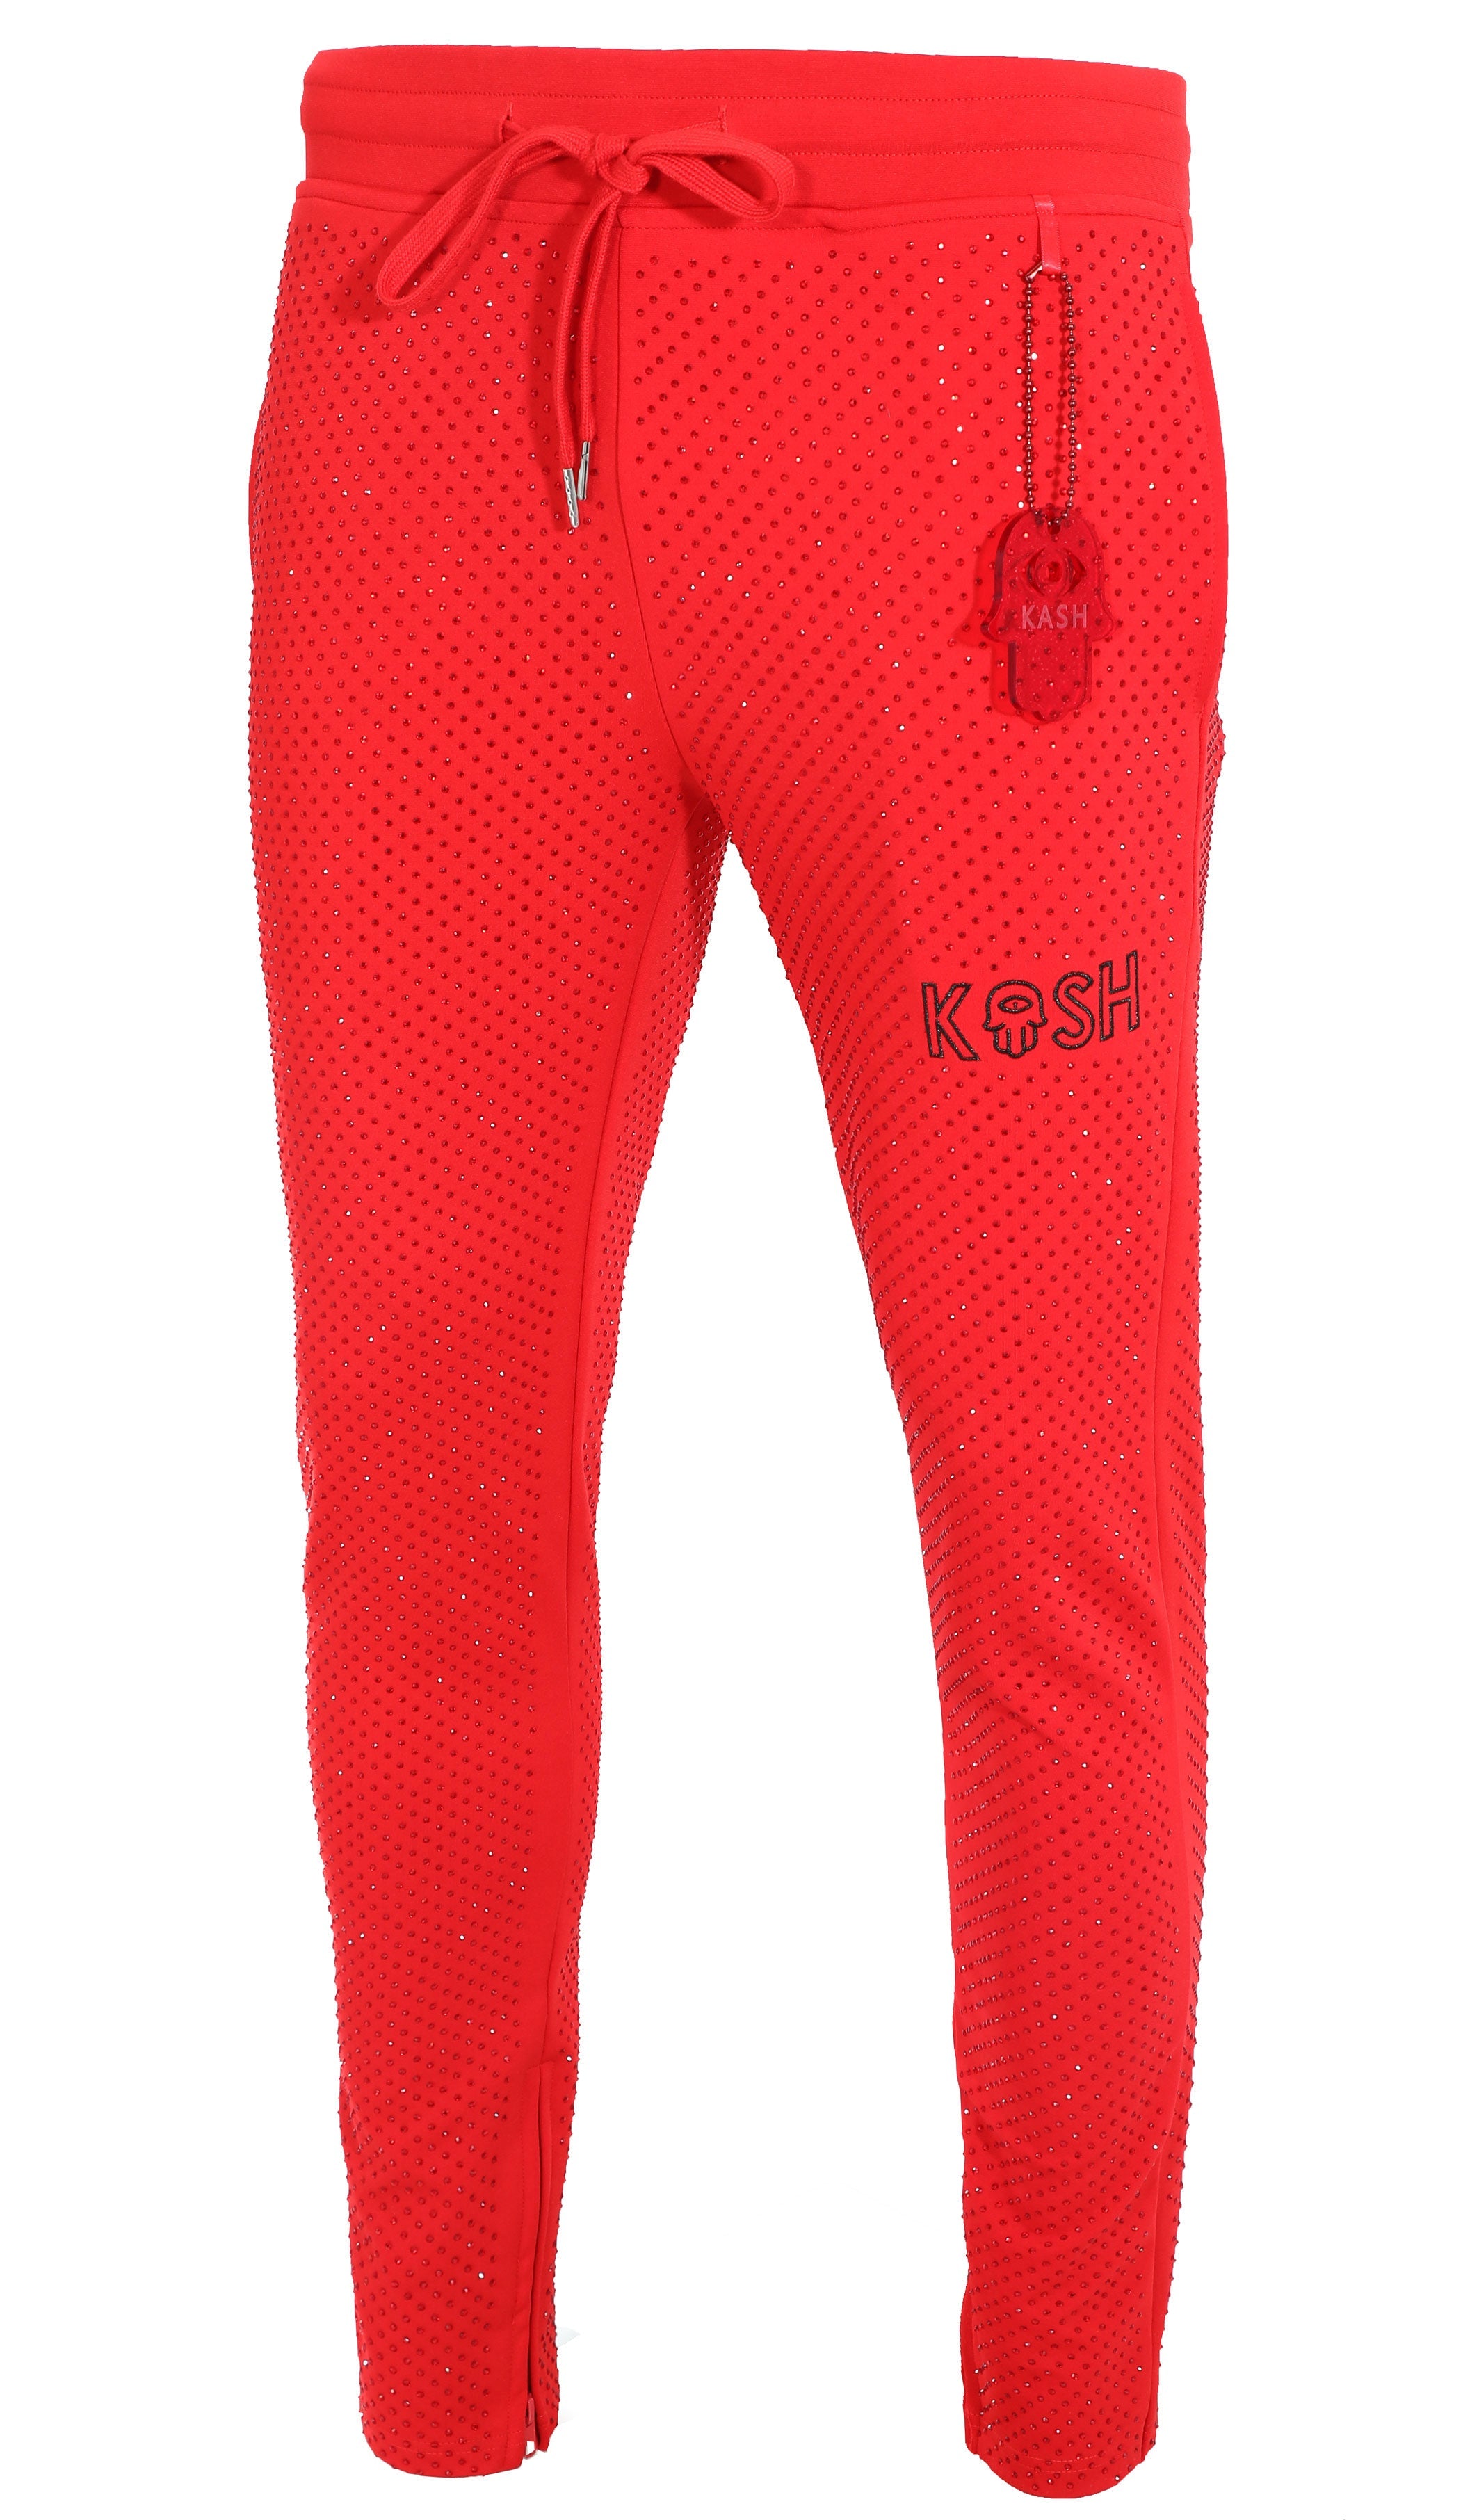 Kash All over diamond track jacket Color: Red Drawstring closure 100% Polyester Wrinkle Free Material Fits true to size